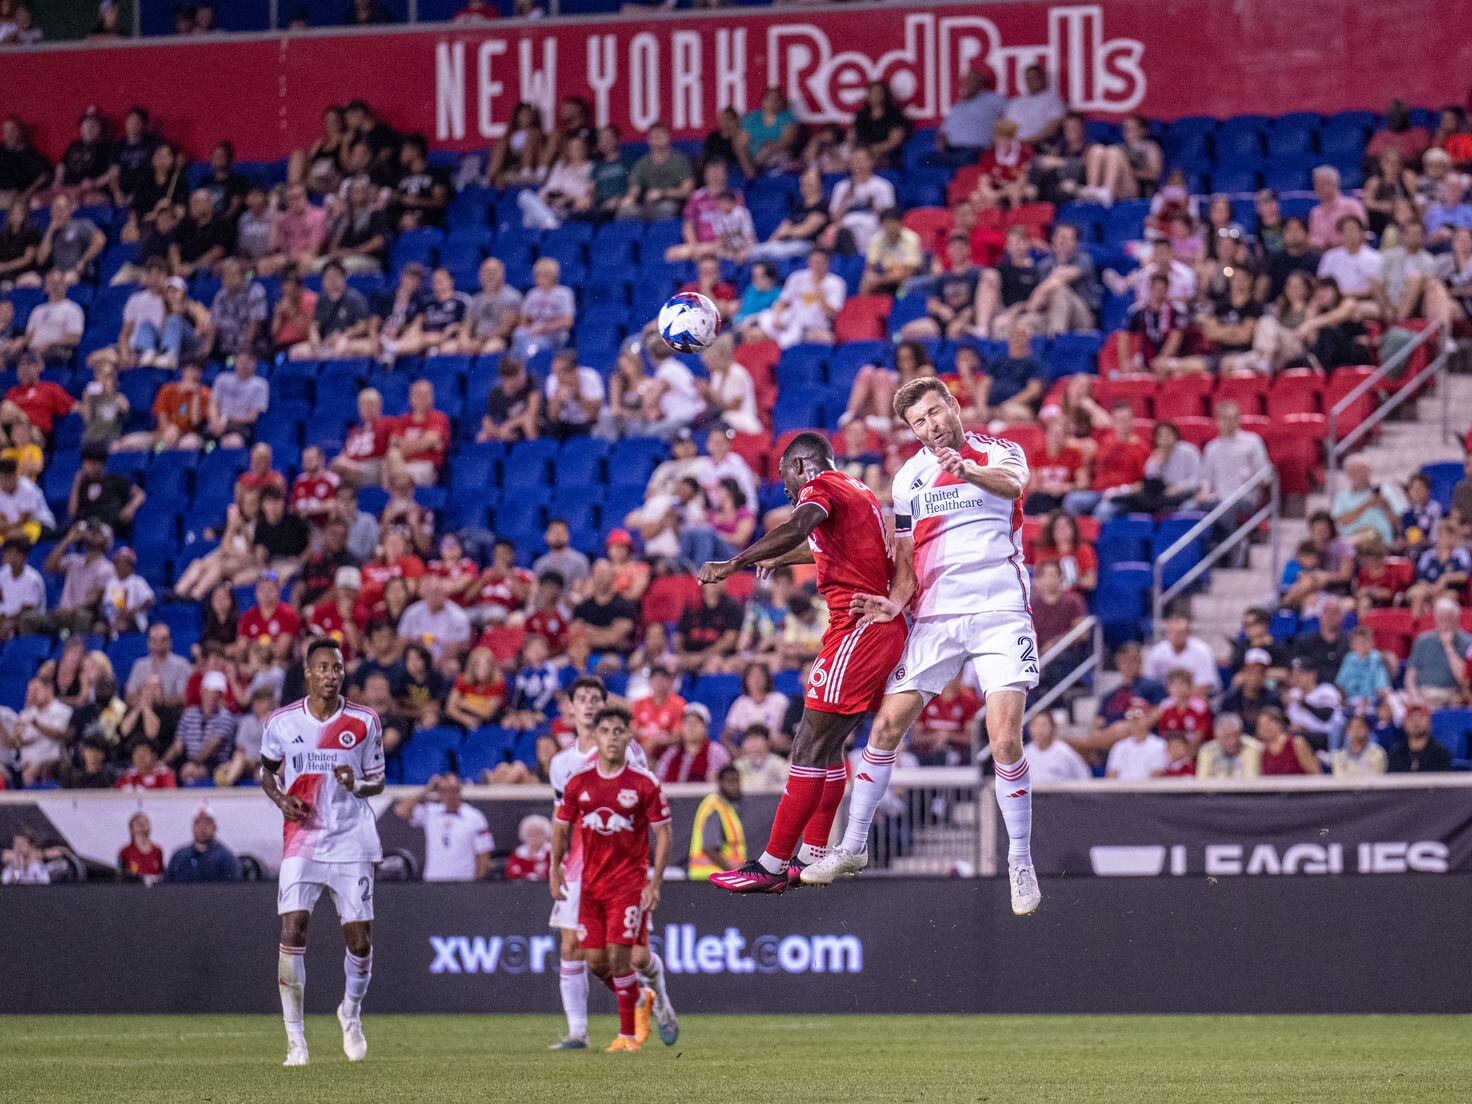 Revs will face Atlético de San Luis and New York Red Bulls in group stage  of Leagues Cup 2023